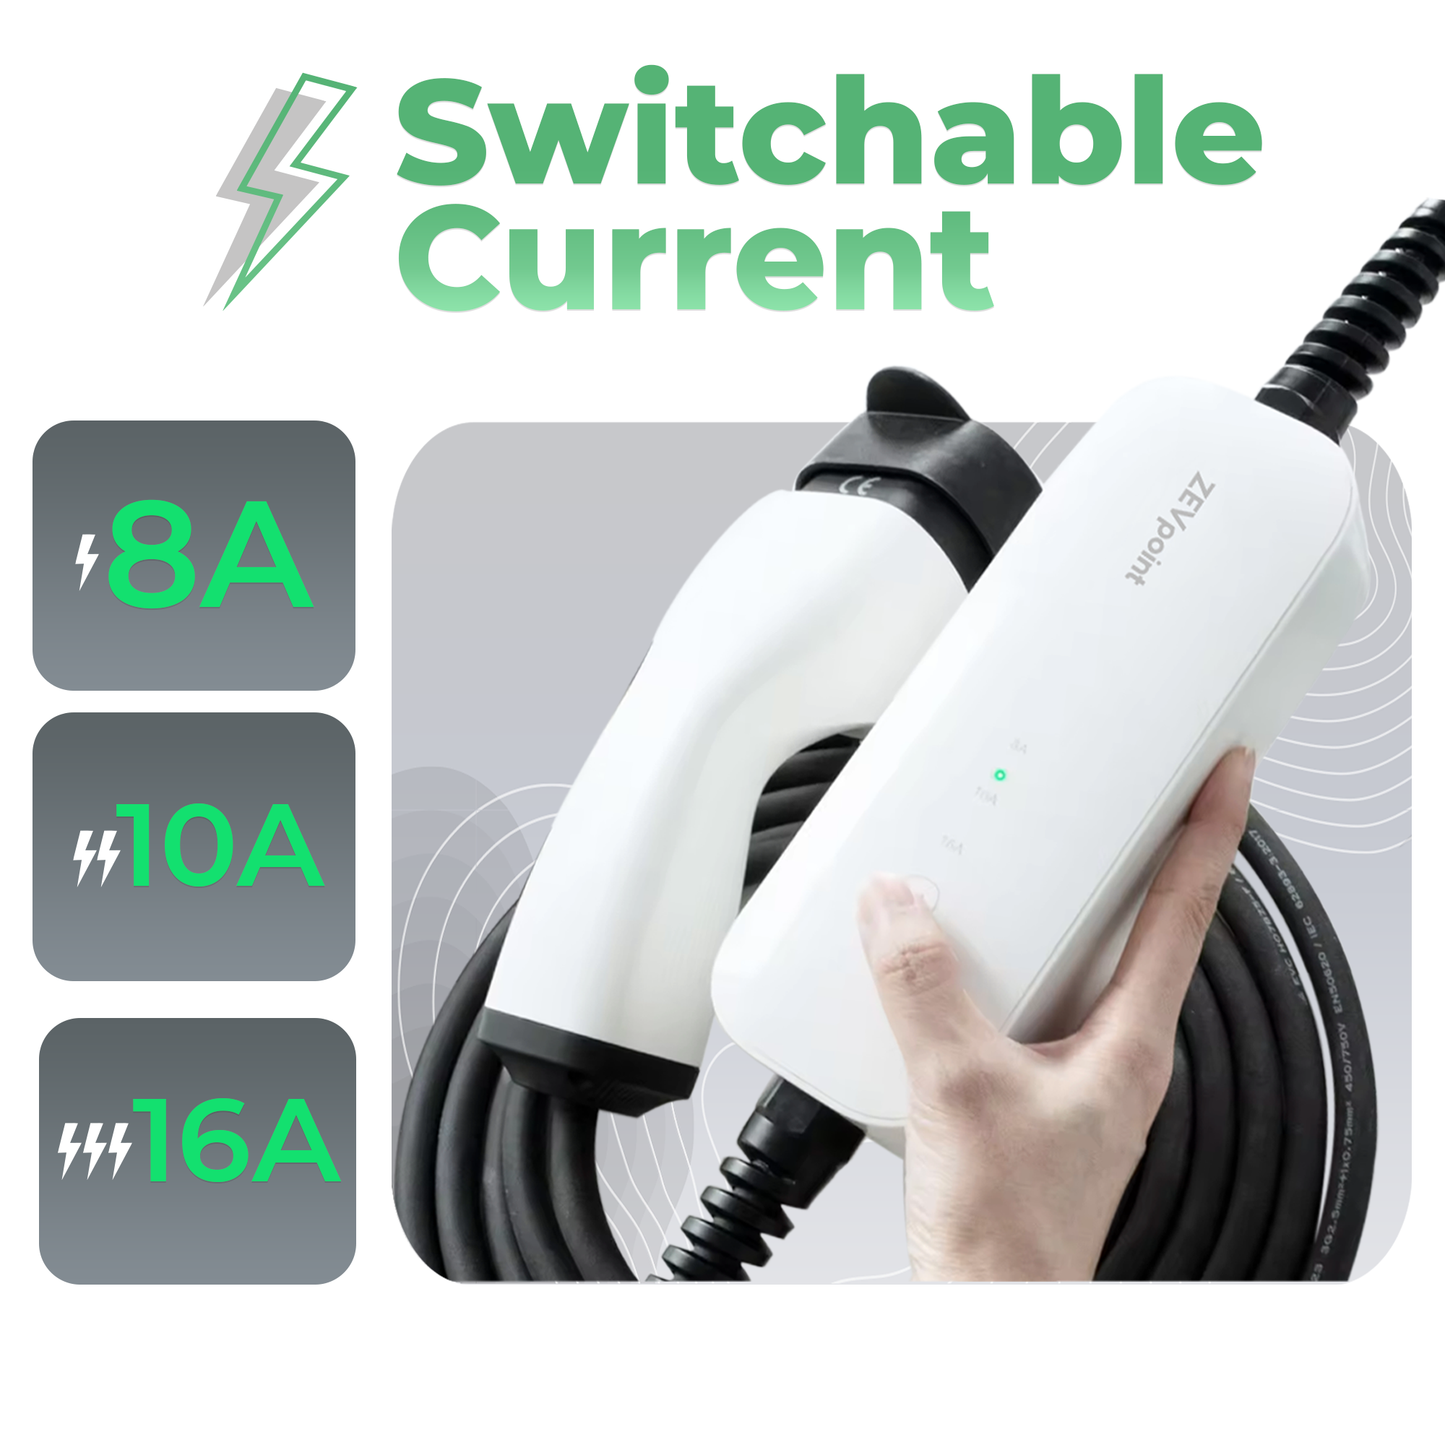 Aveo 3.6kw Portable EV Charger (Single Phase, 16A)